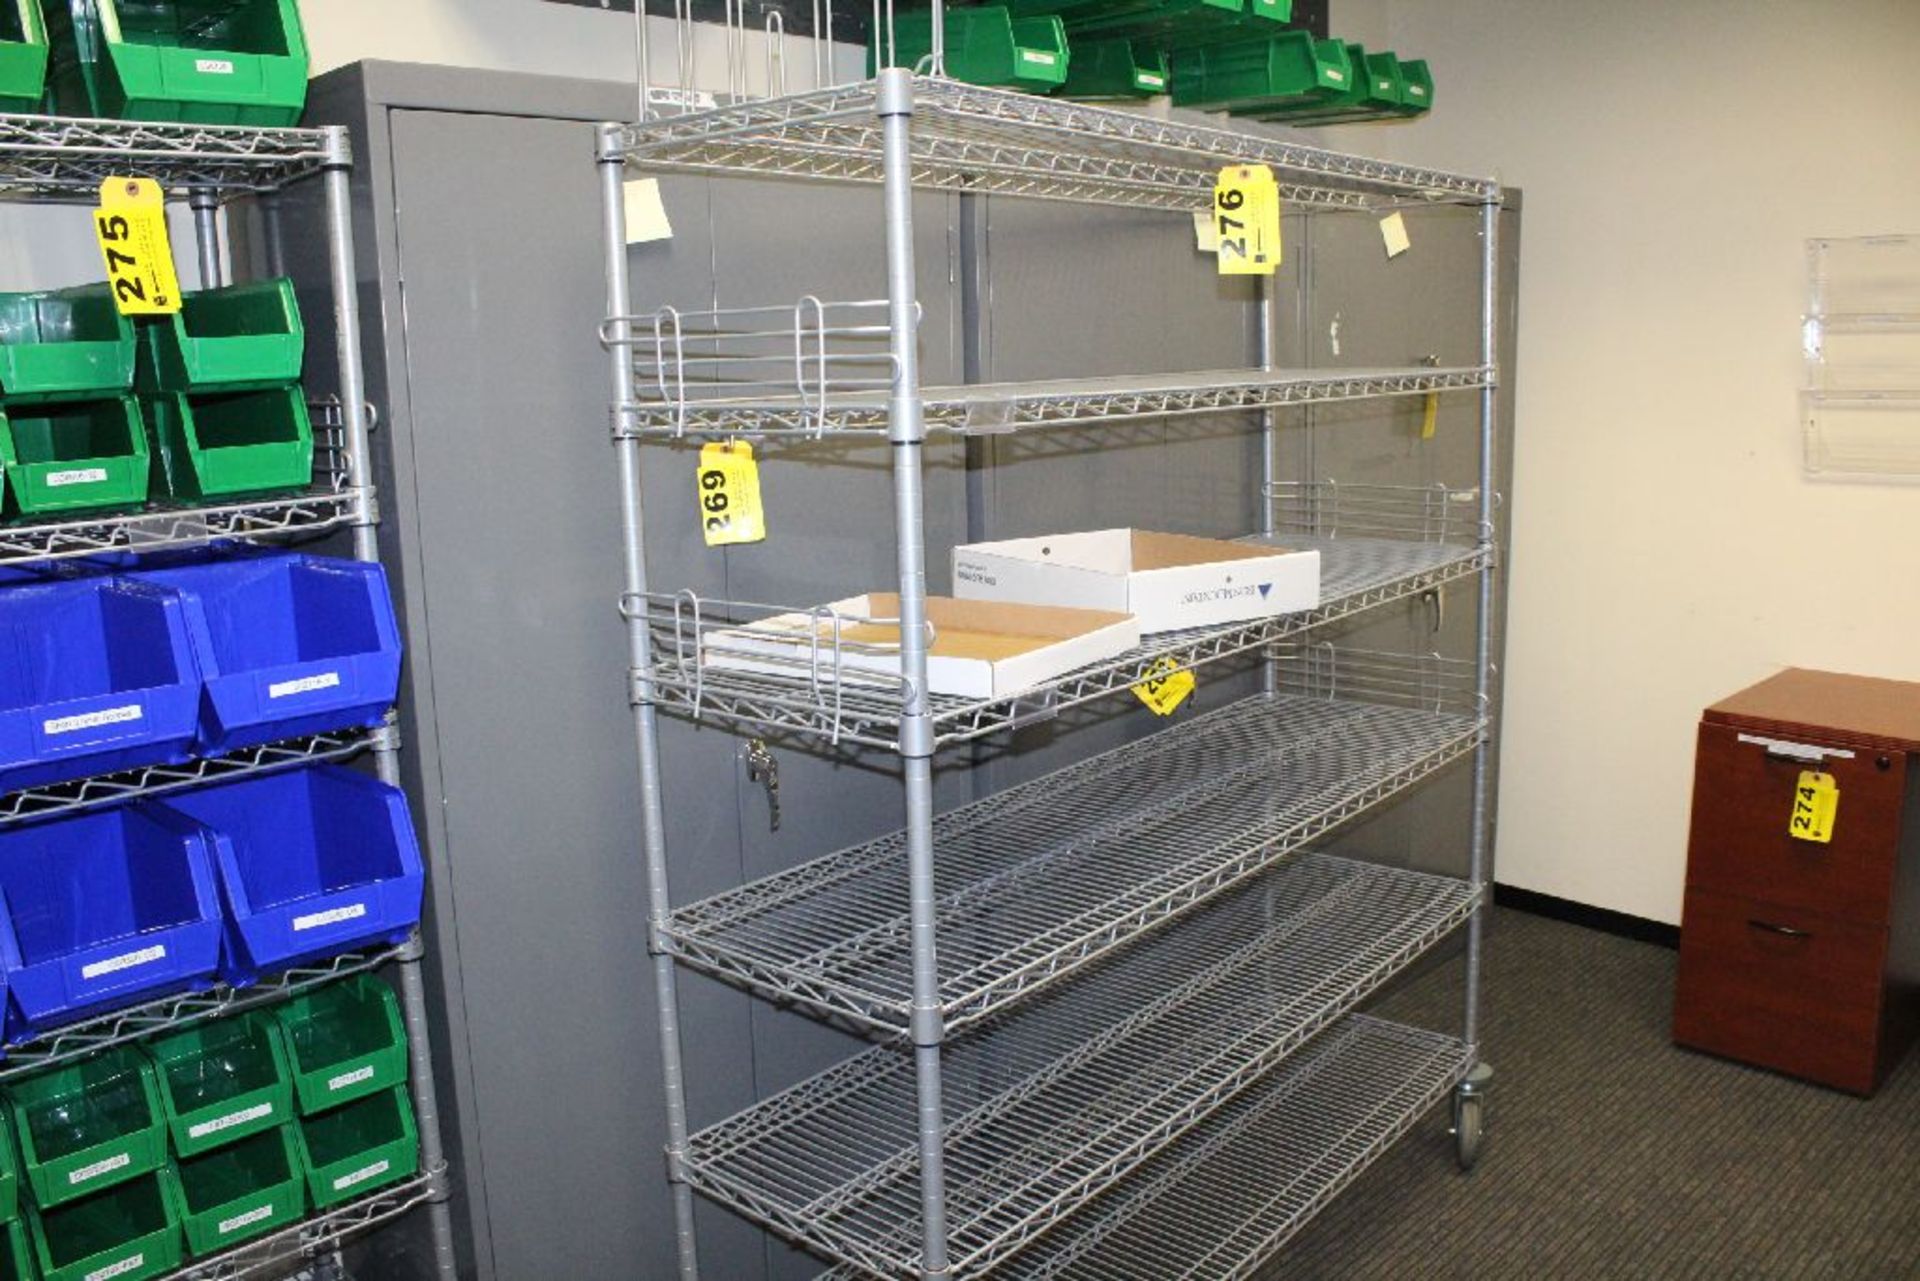 WIRE SHELVING RACK WITH CASTERS, 69" X 60" X 18"